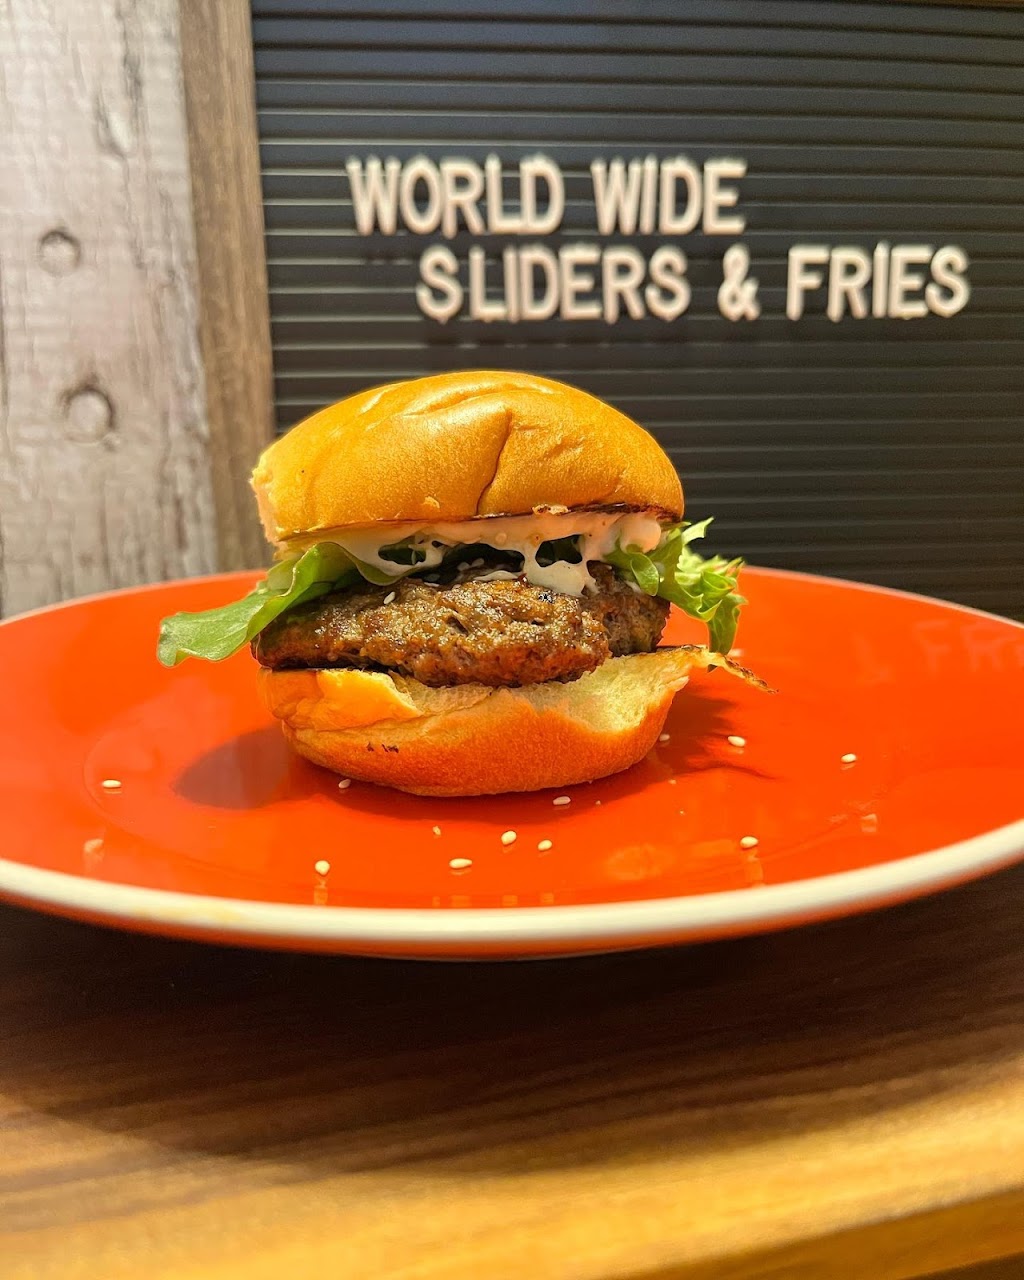 World Wide Sliders and Fries | restaurant | 1993 ON-15, Kingston, ON K7L 4V3, Canada | 3435805737 OR +1 343-580-5737